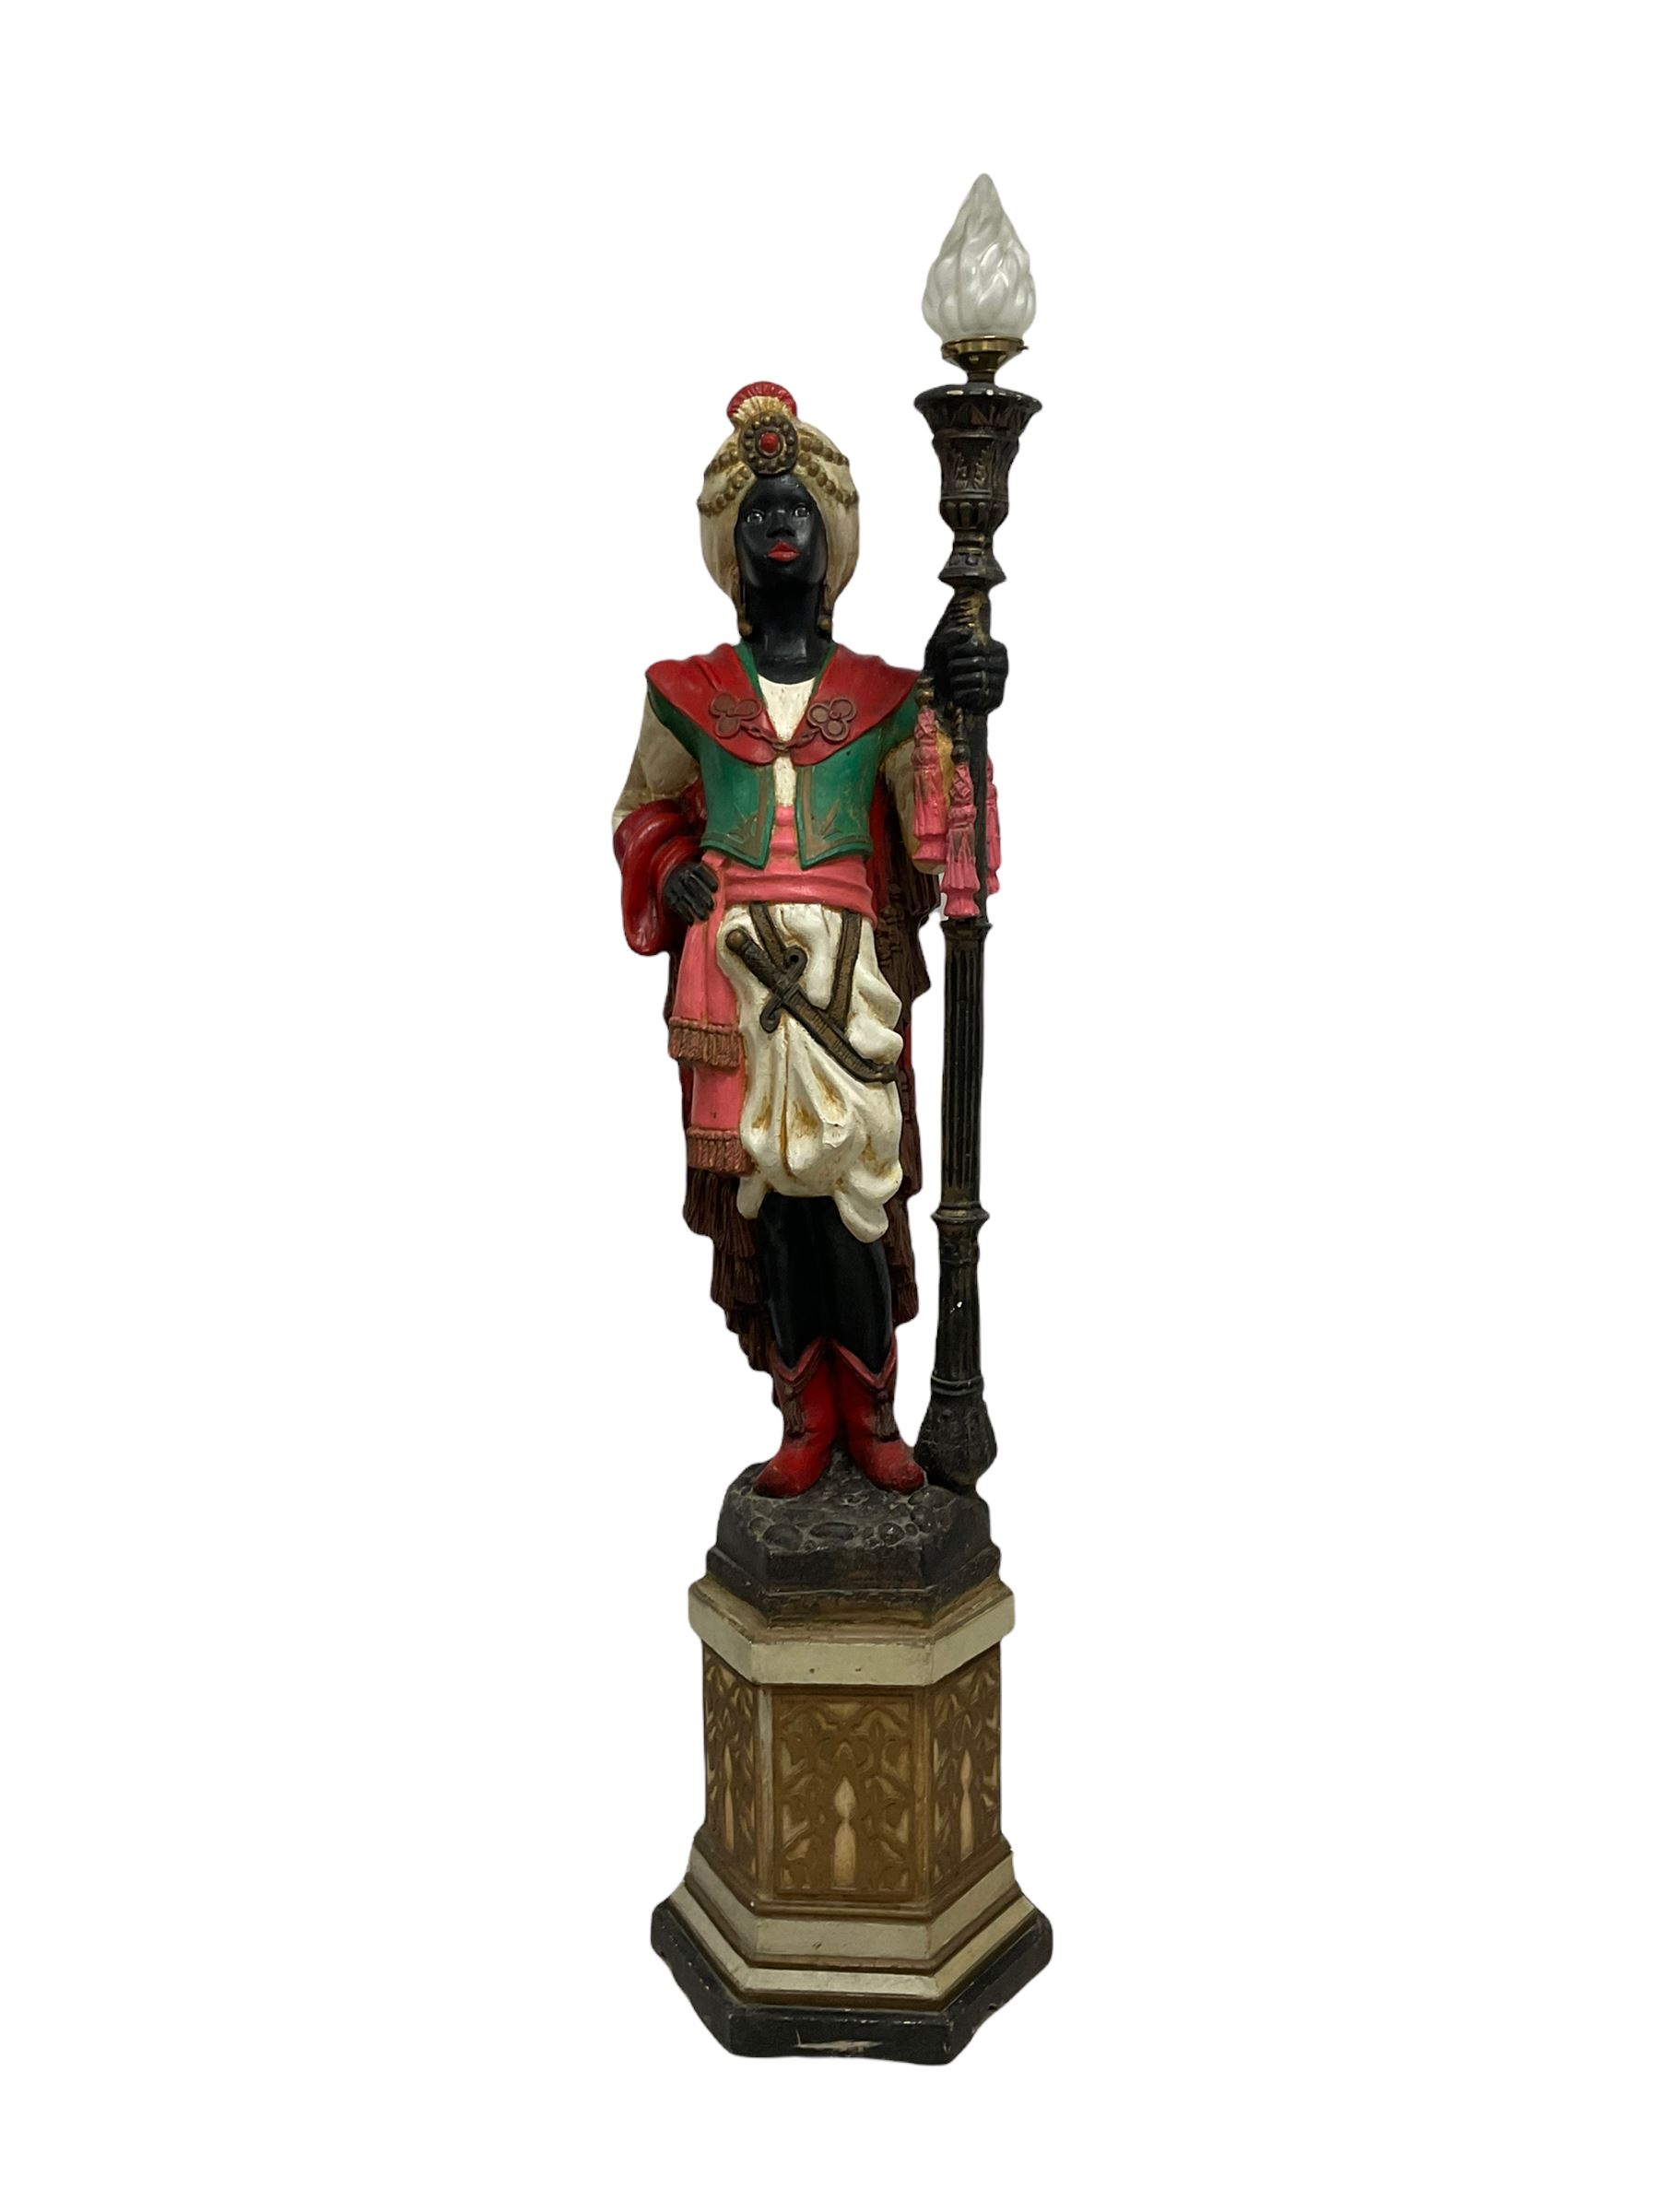 Standard lamp in the form of a Moorish courtier holding a light in the form of a torch staff - Image 2 of 5